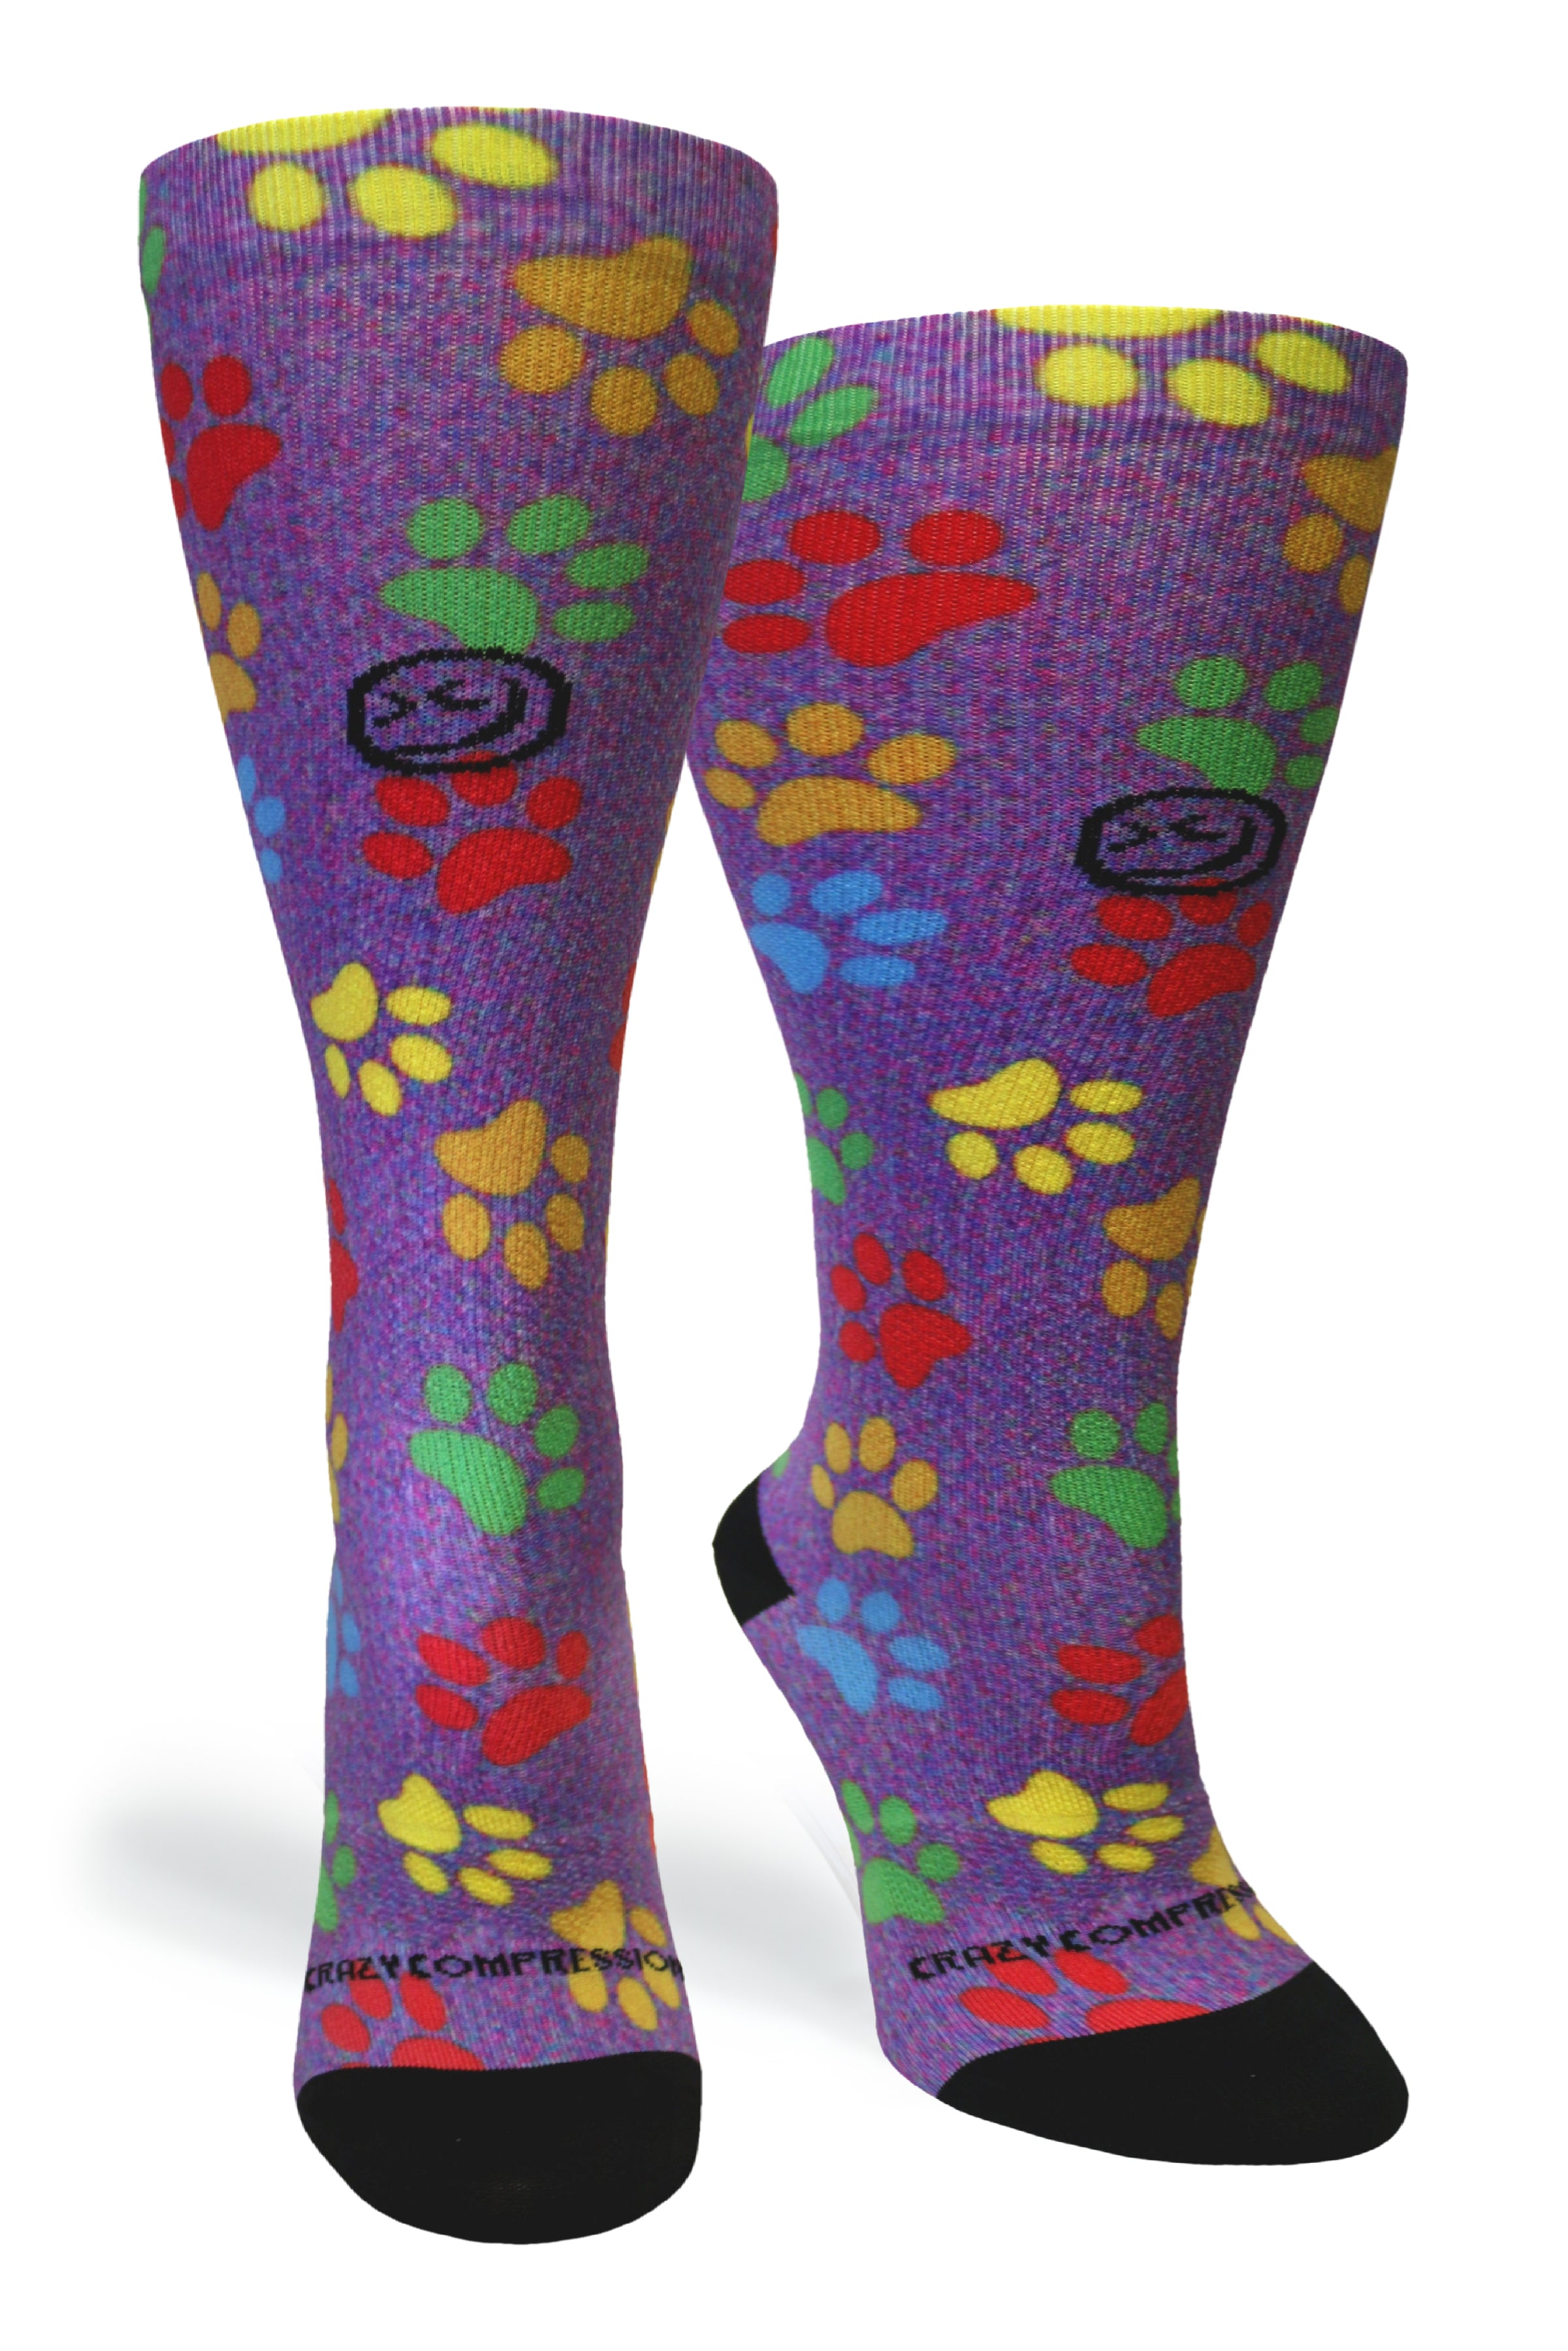 360 Paw Prints Station Purple (EXTRA WIDE CALF)